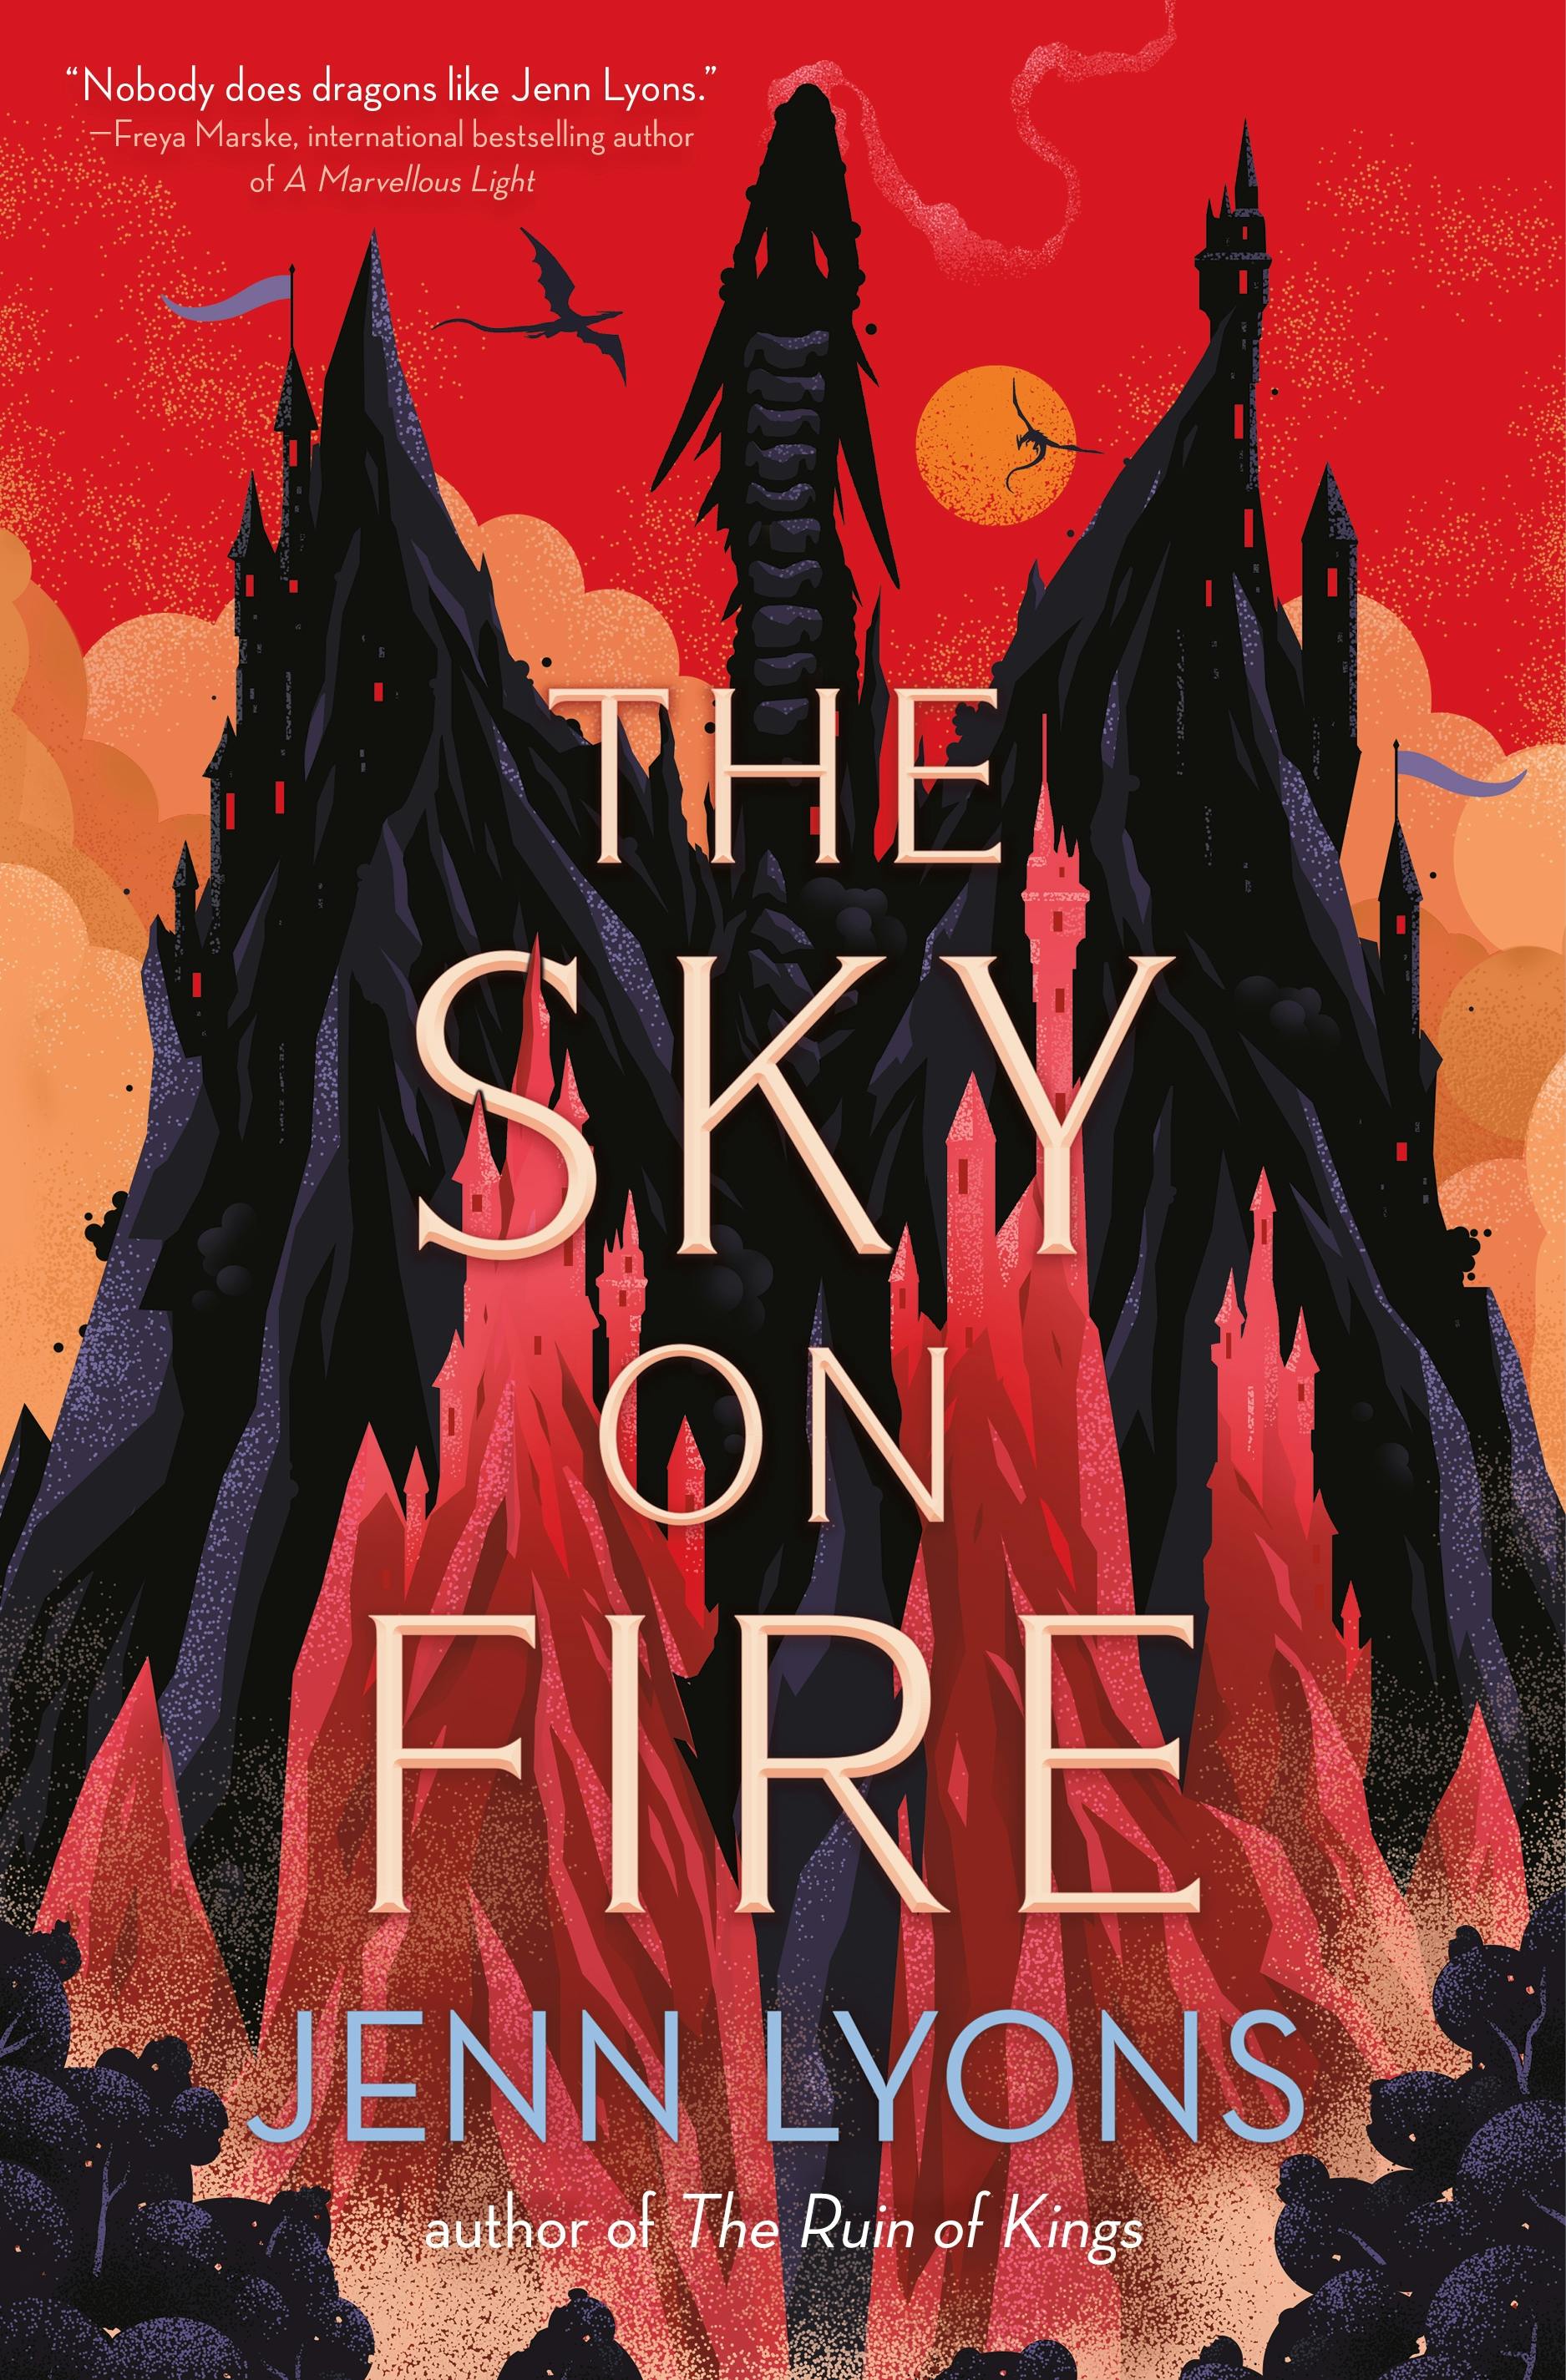 Cover for the book titled as: The Sky on Fire